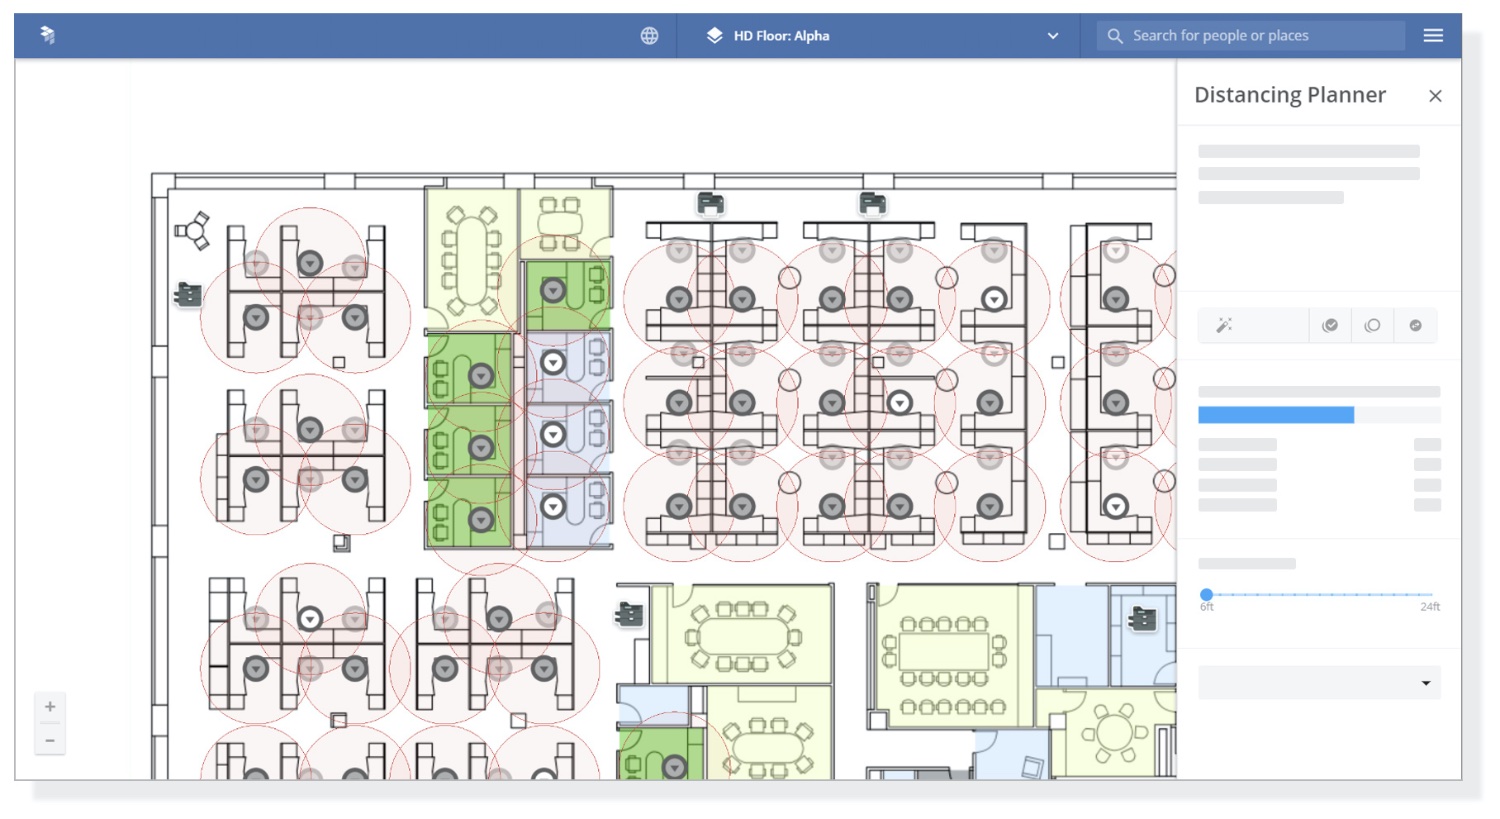 OfficeSpace releases distancing planner tool to help organizations reopen safely